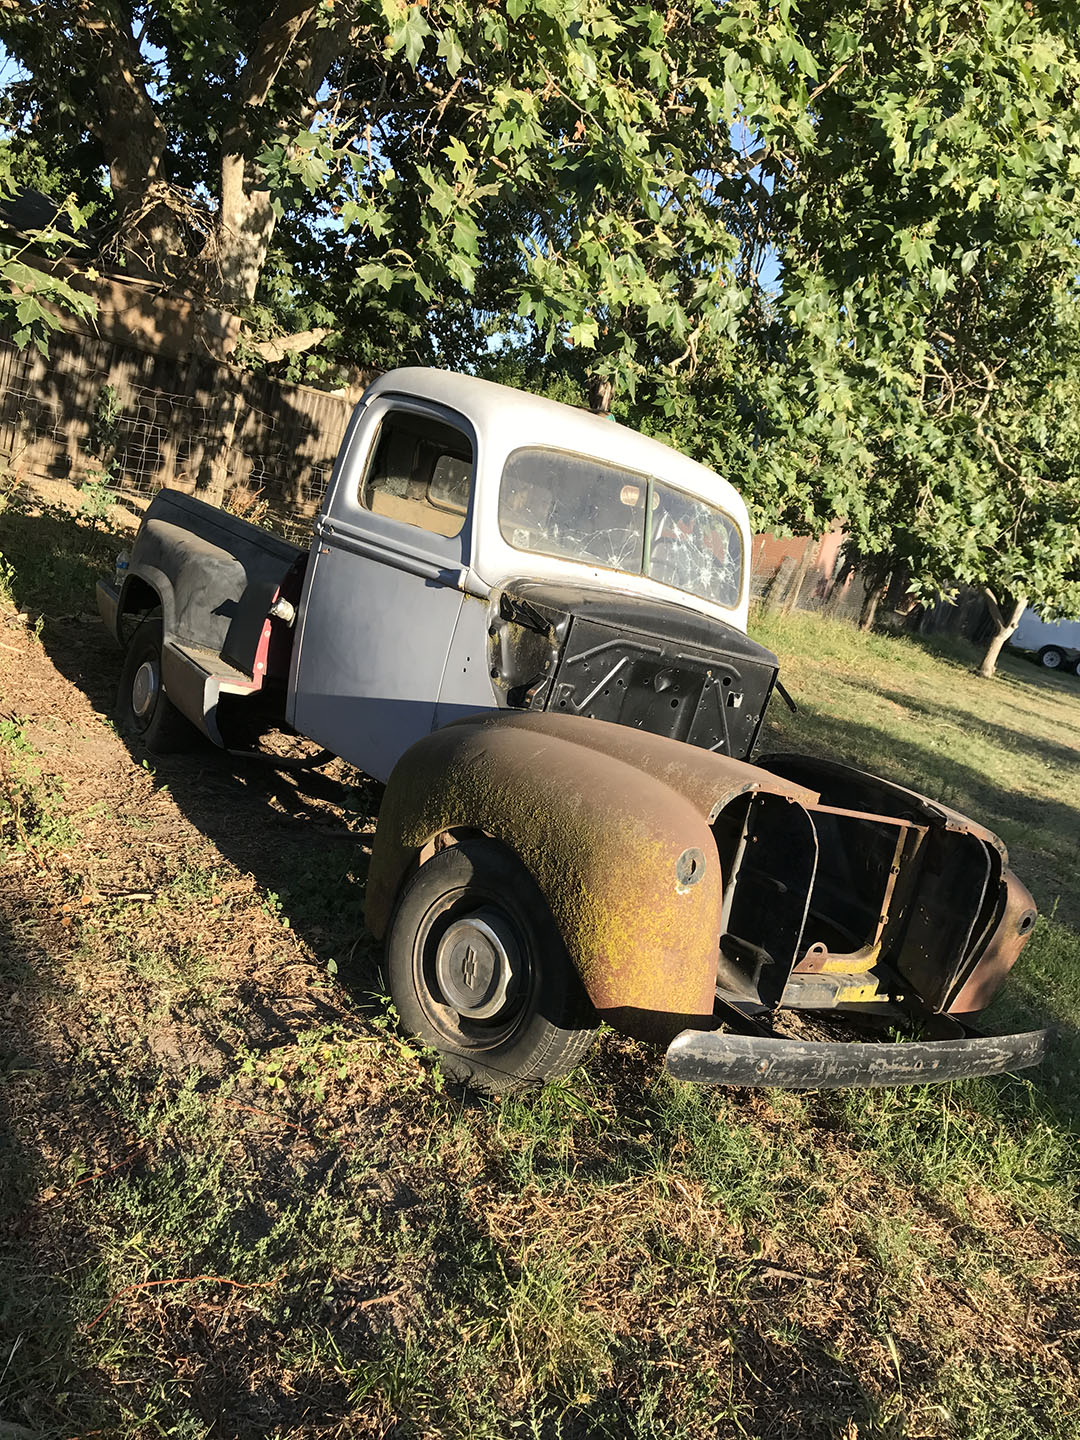 1941 ford truck - 41 ford truck